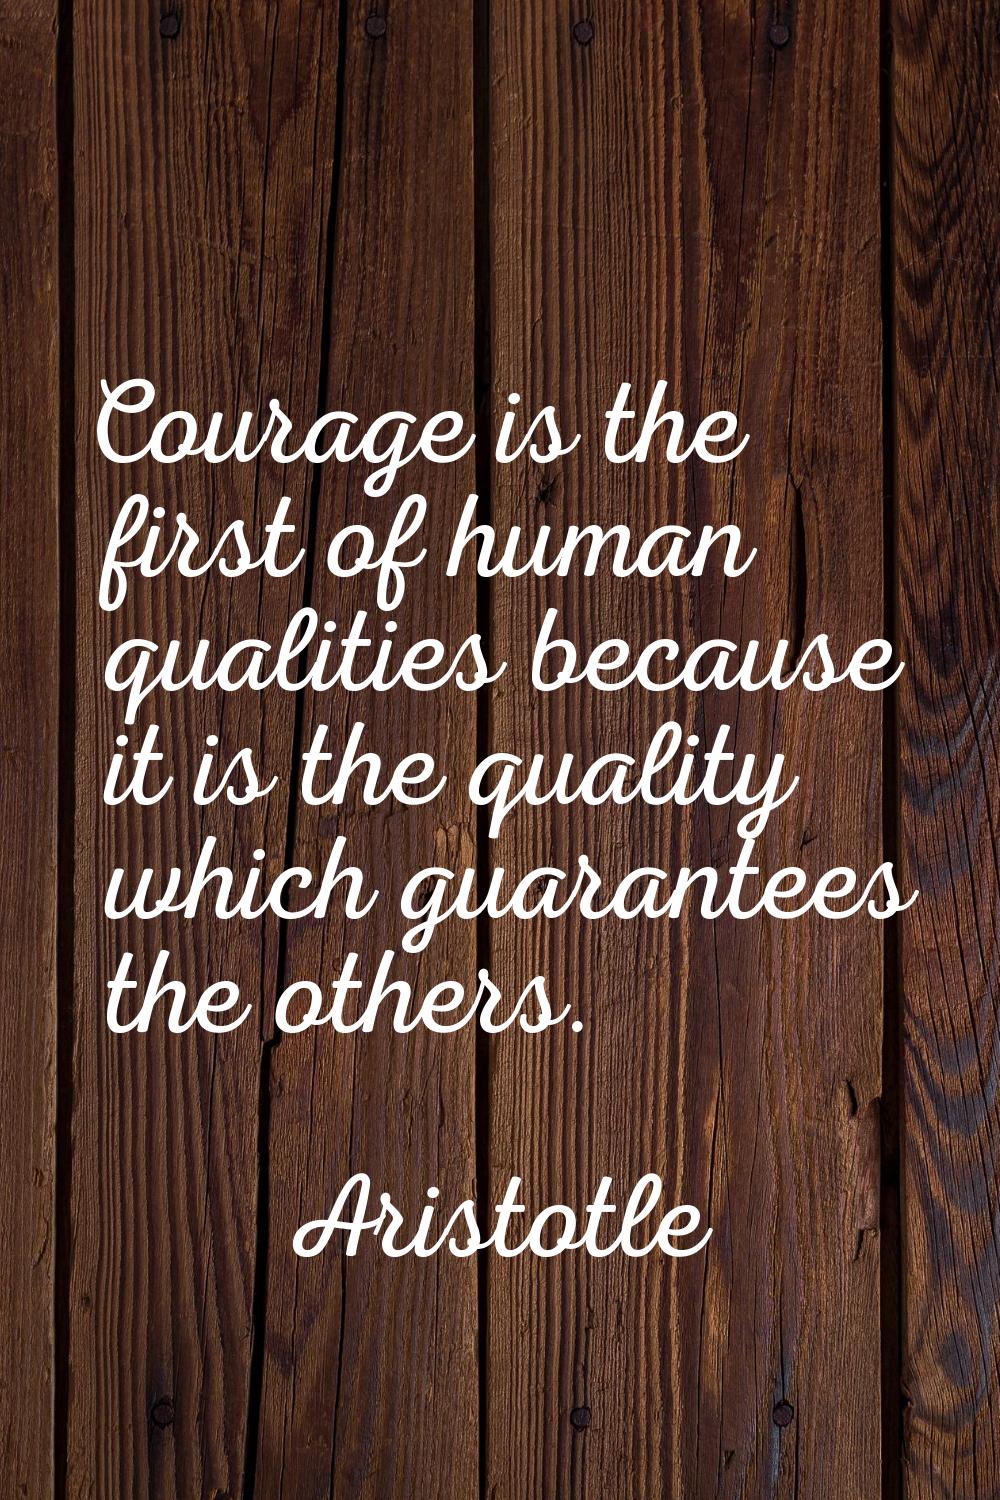 Courage is the first of human qualities because it is the quality which guarantees the others.